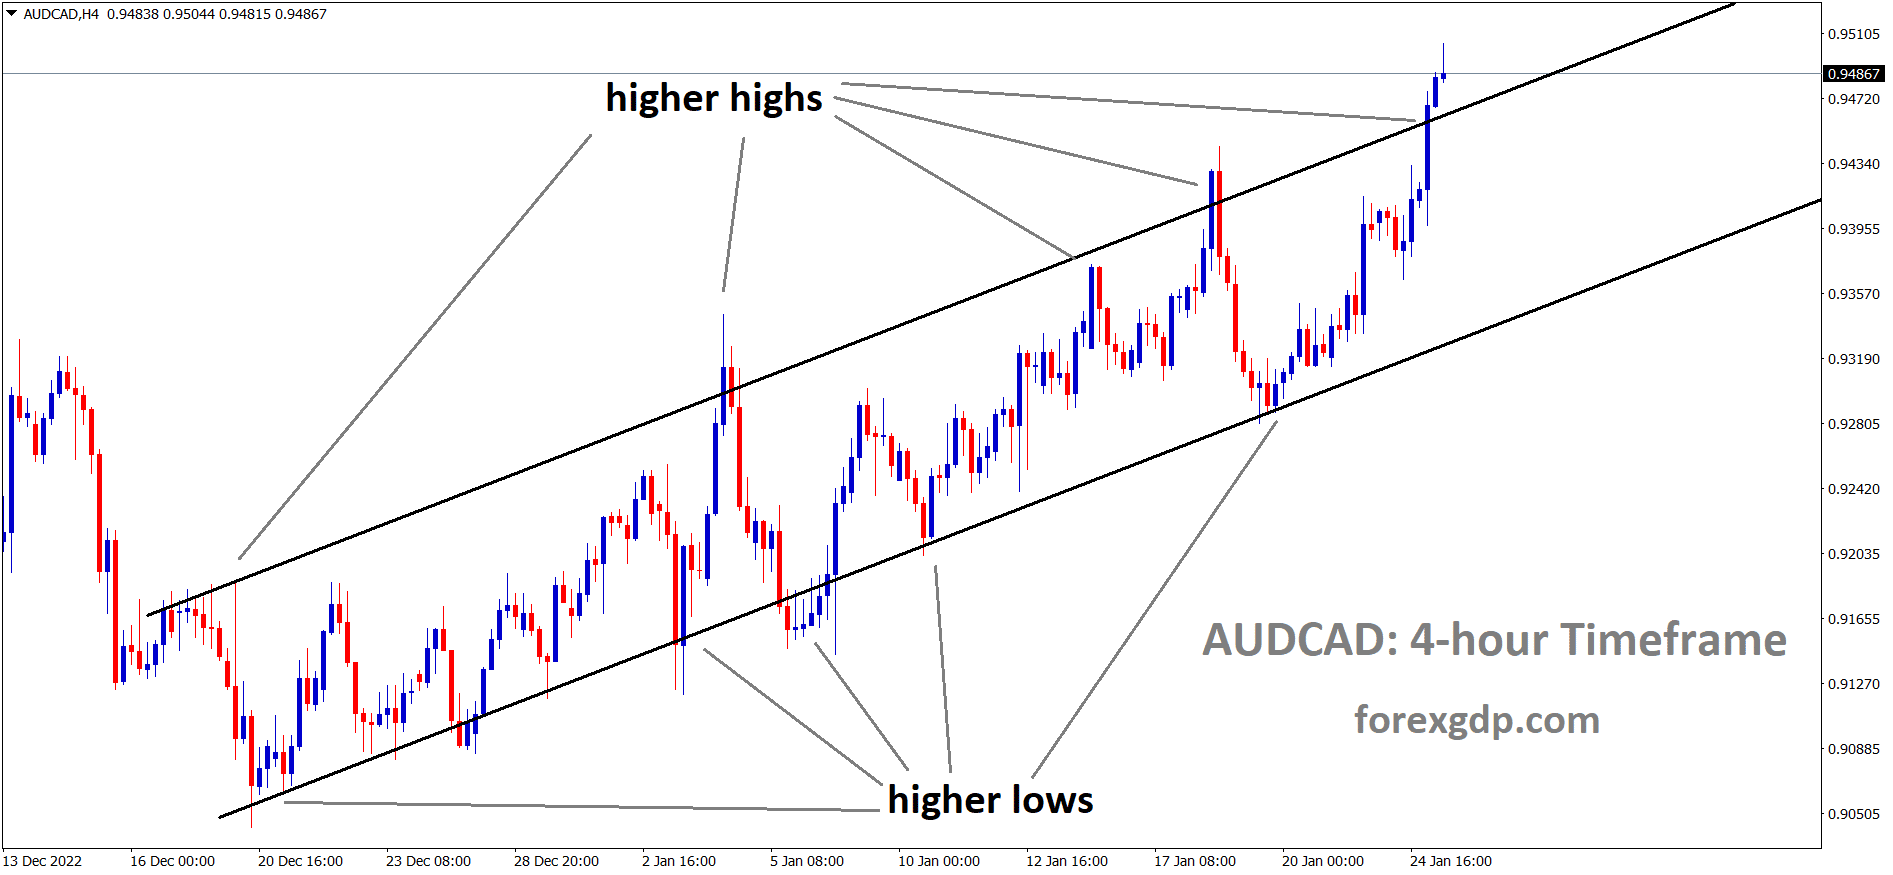 AUDCAD is moving in a Ascending channel and the market has reached the higher high area of the channel.